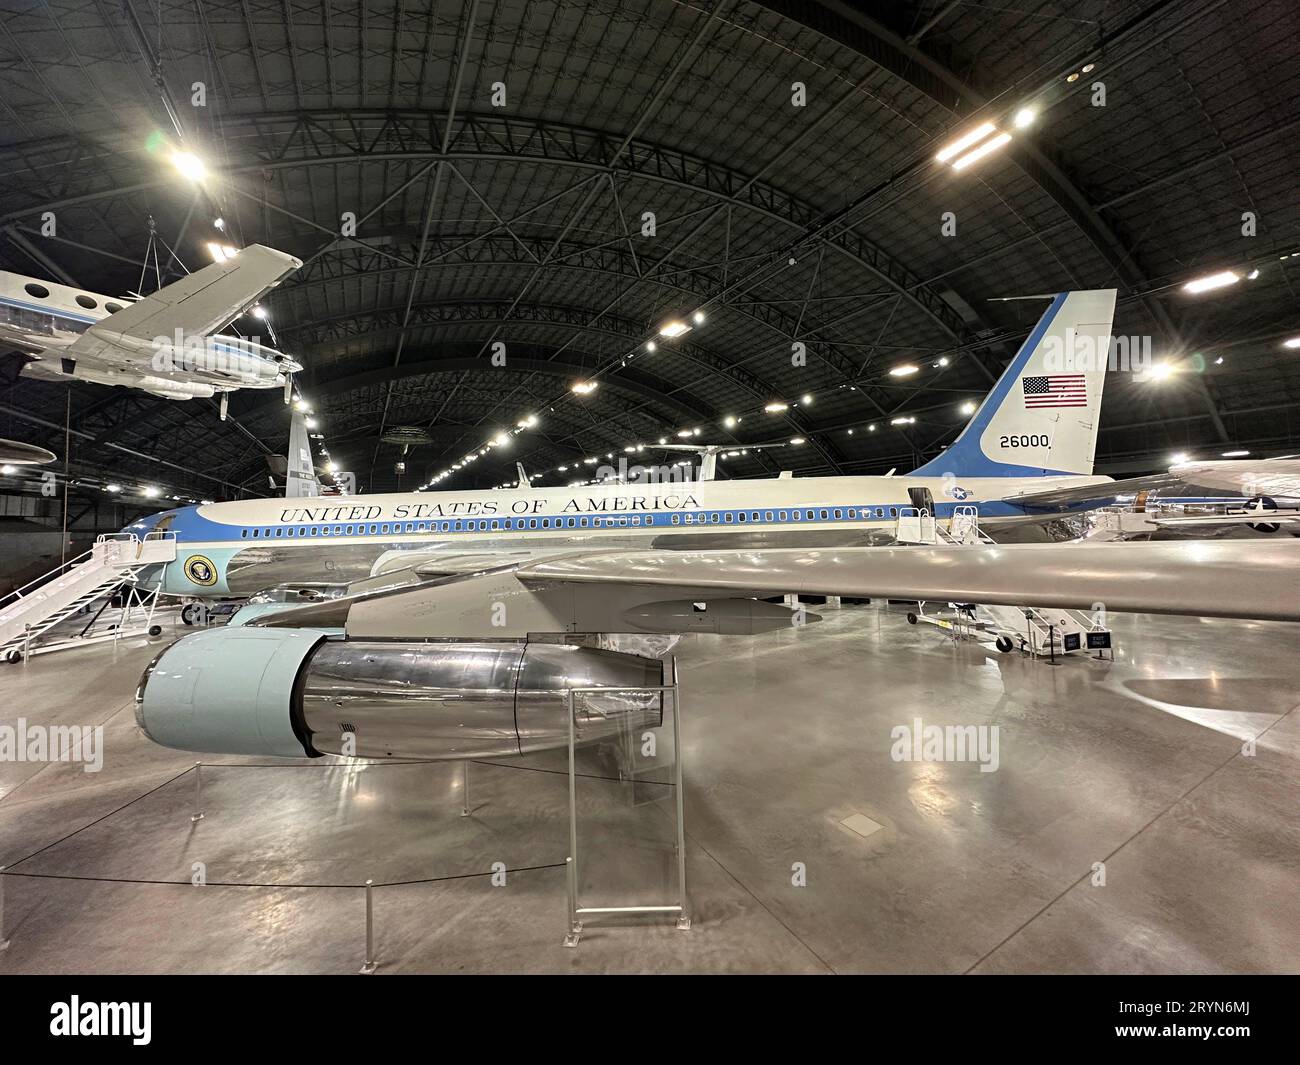 SAM 26000 Presidential Boeing VC-137C Aircraft Stock Photo